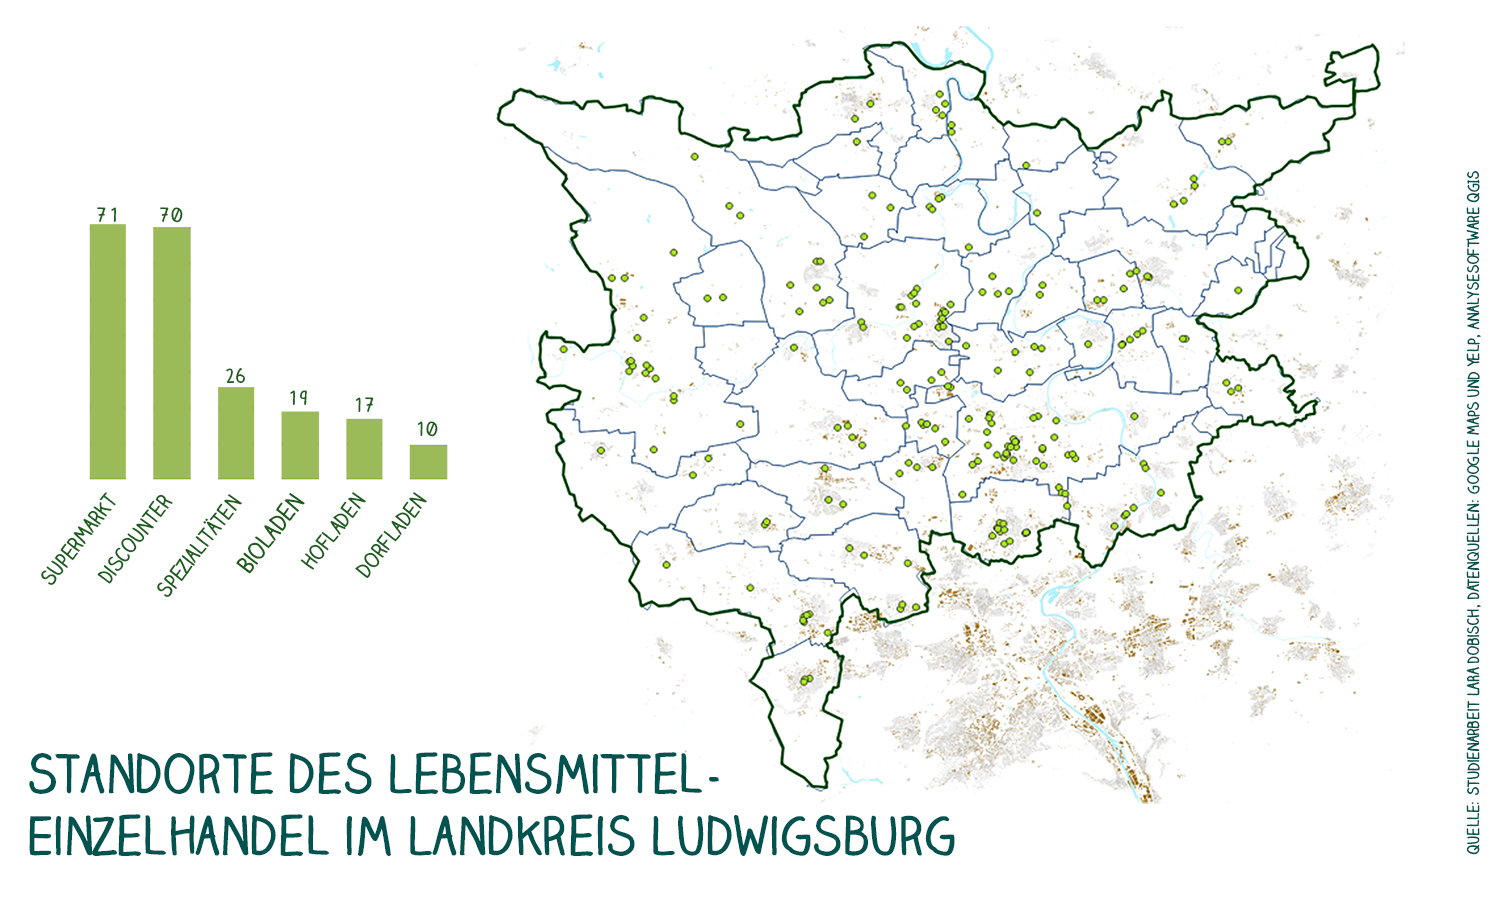 The infographic shows the district of Ludwigsburg with its districts and, marked with green dots, the locations of the food retailers. The bar graph also shows the number of supermarkets (71), discounters (70), specialty shops (26), organic shops (19), farm shops (17) and village shops (10).